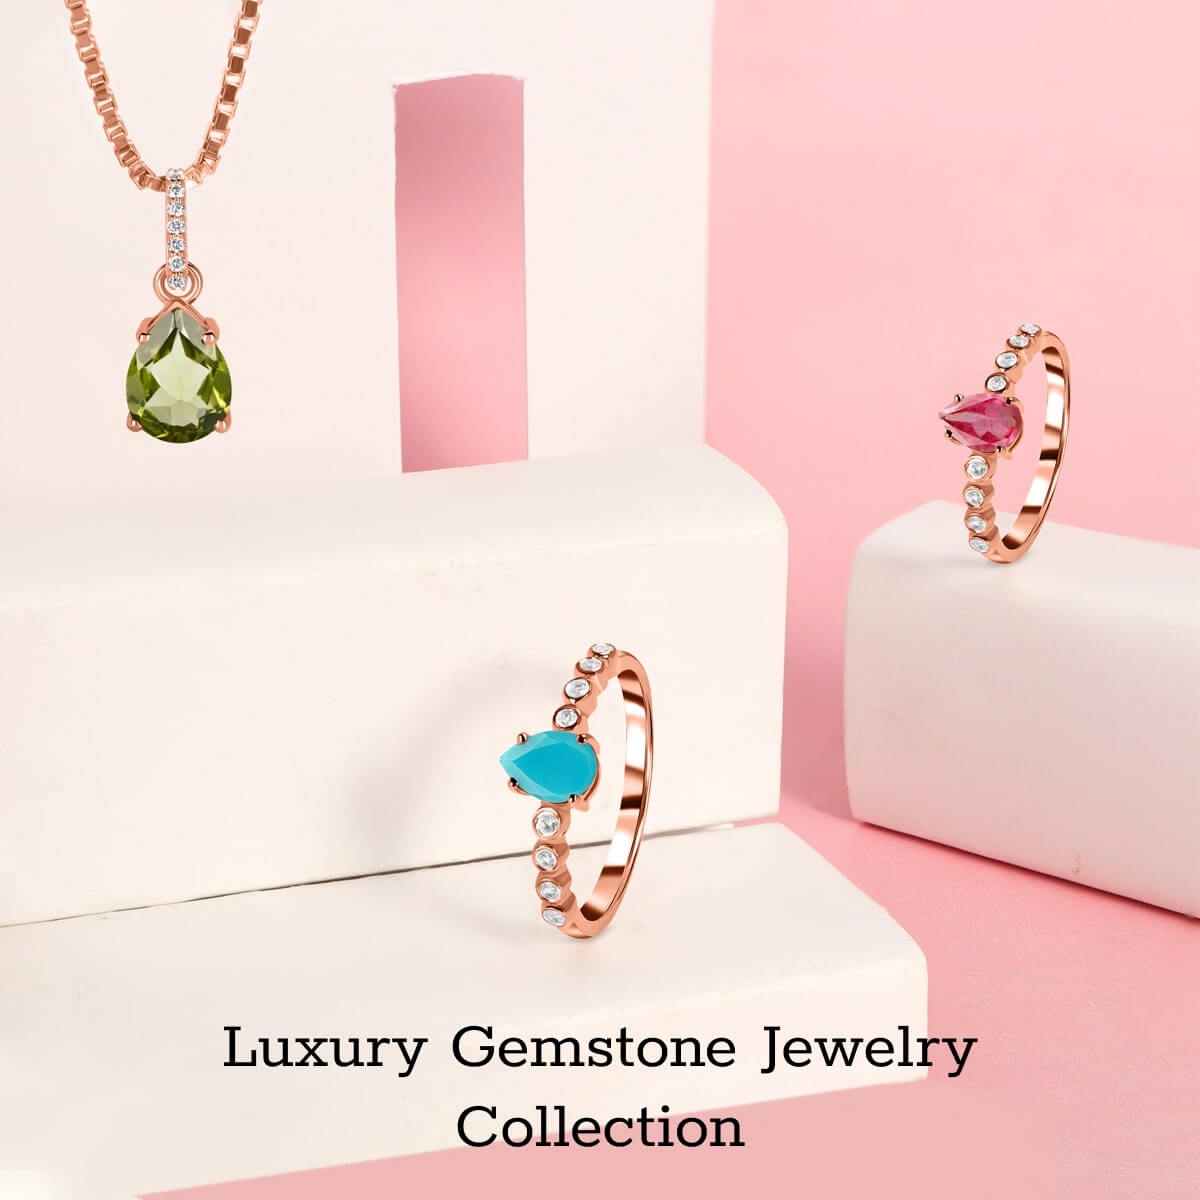 Beautiful Collections of Gemstone Jewelry!